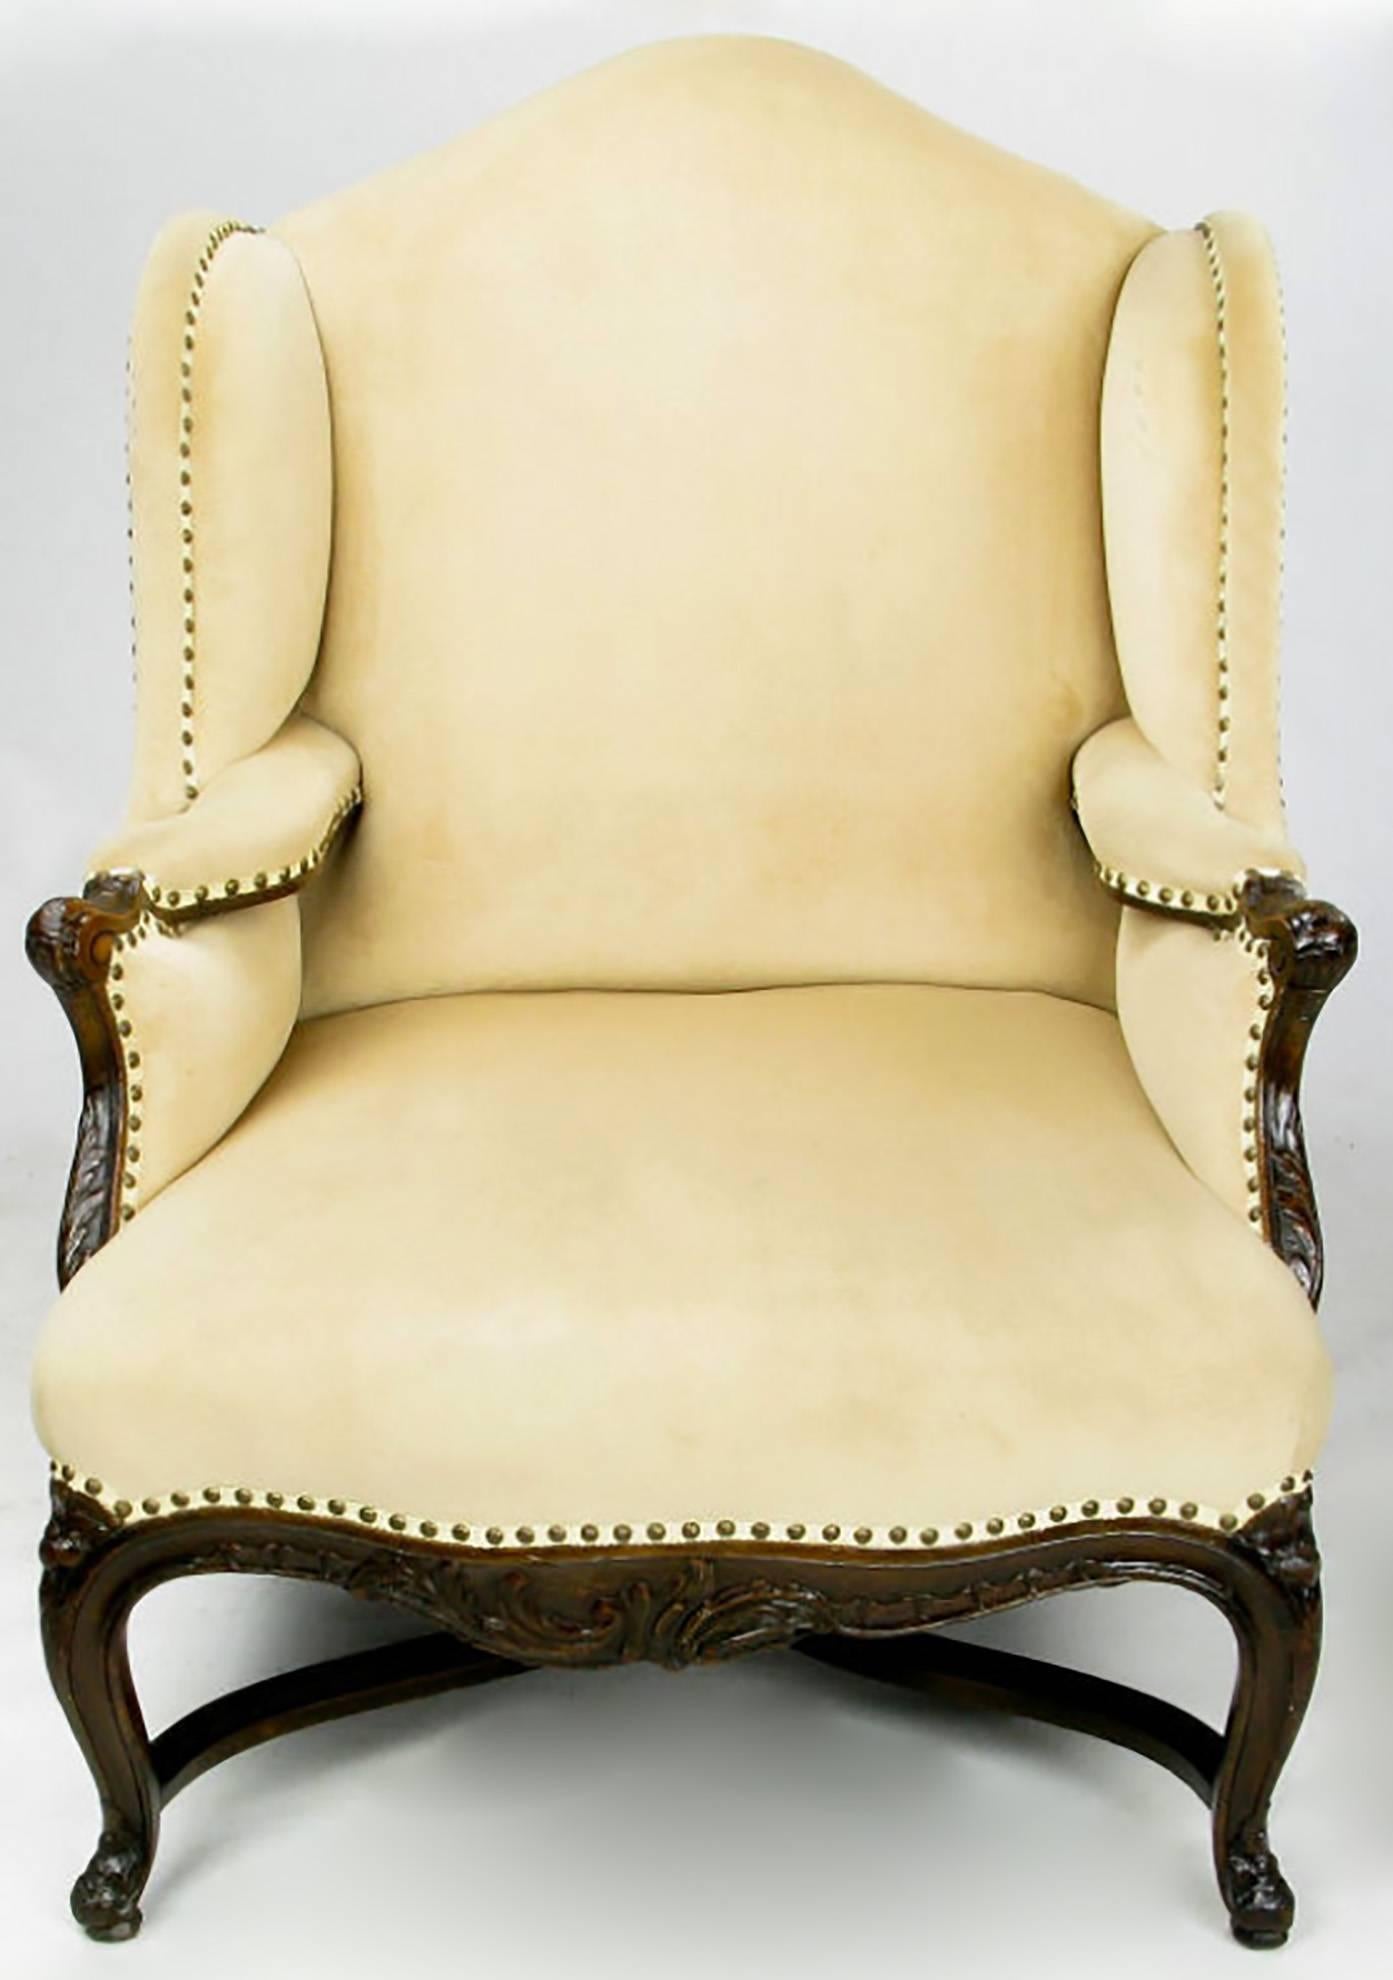 20th century recreation of a Classic Regence bergere with exaggerated wingback. The seat is quite comfortable and is almost wide enough for two. The camel velvet upholstery is set off by brass nailhead trim. Wonderfully carved wood arms and legs as